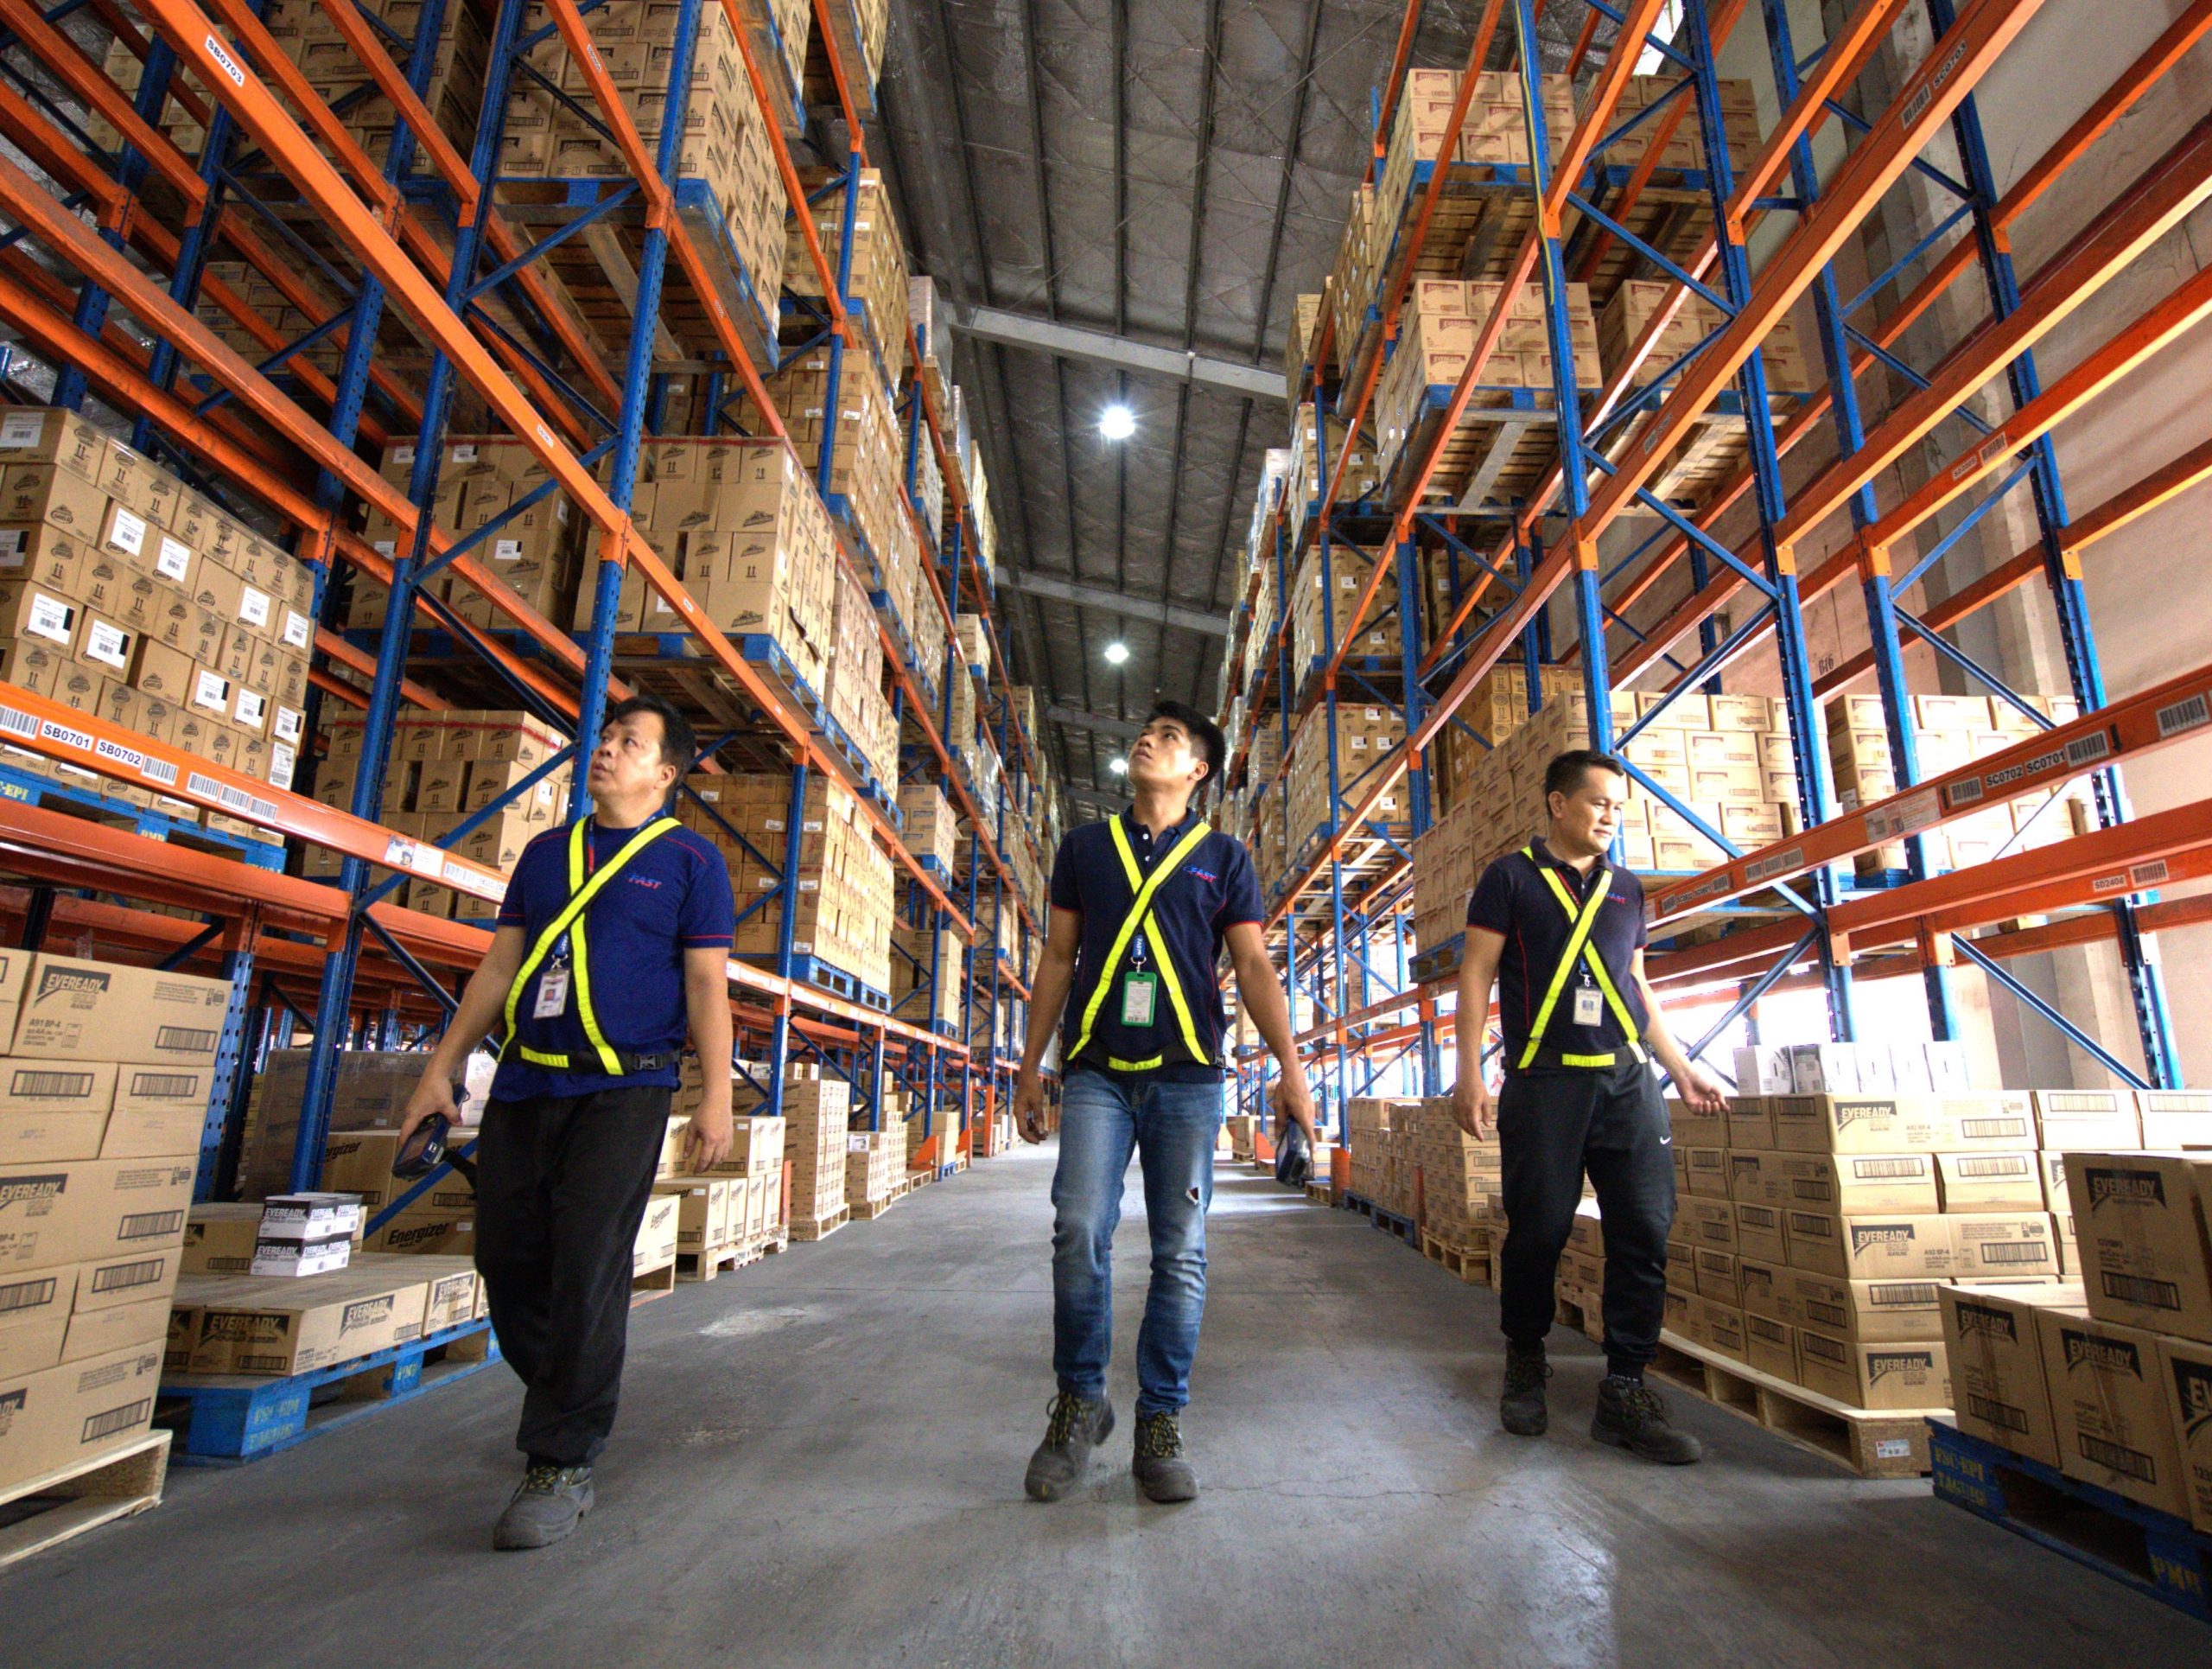 smart warehouse technology helps businesses in managing high logistics demand